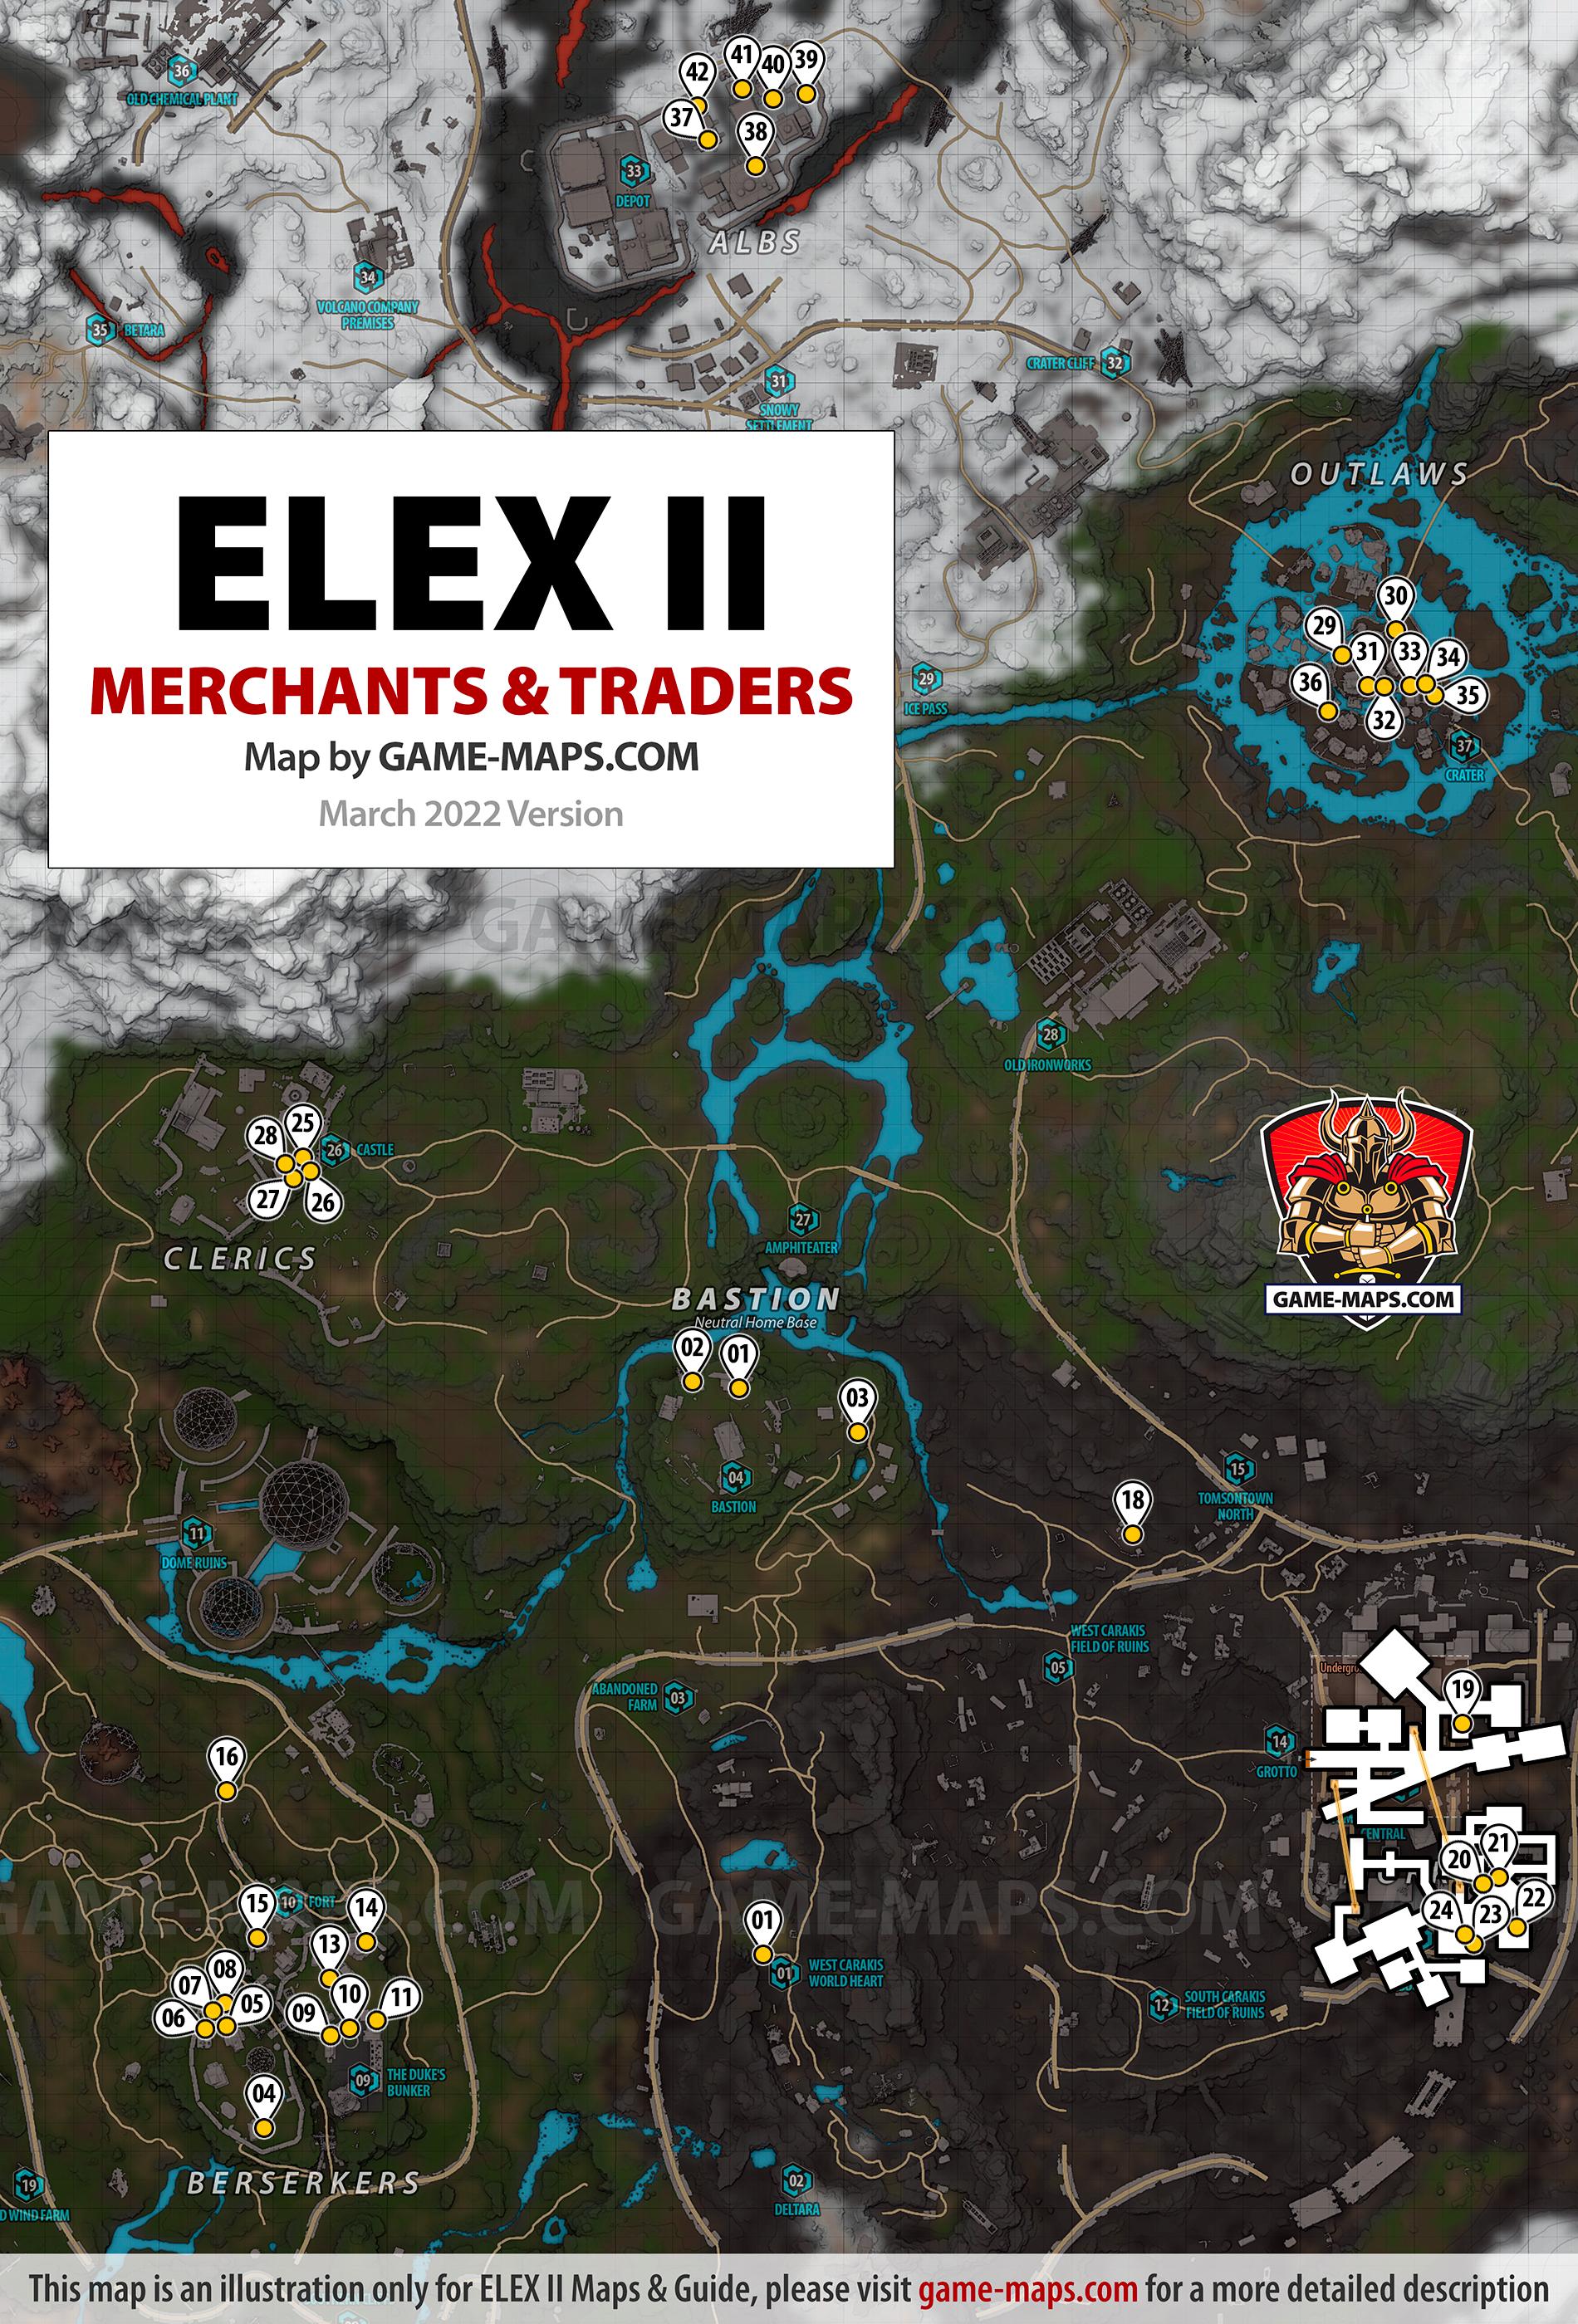 Map for ELEX II with location of Merchants